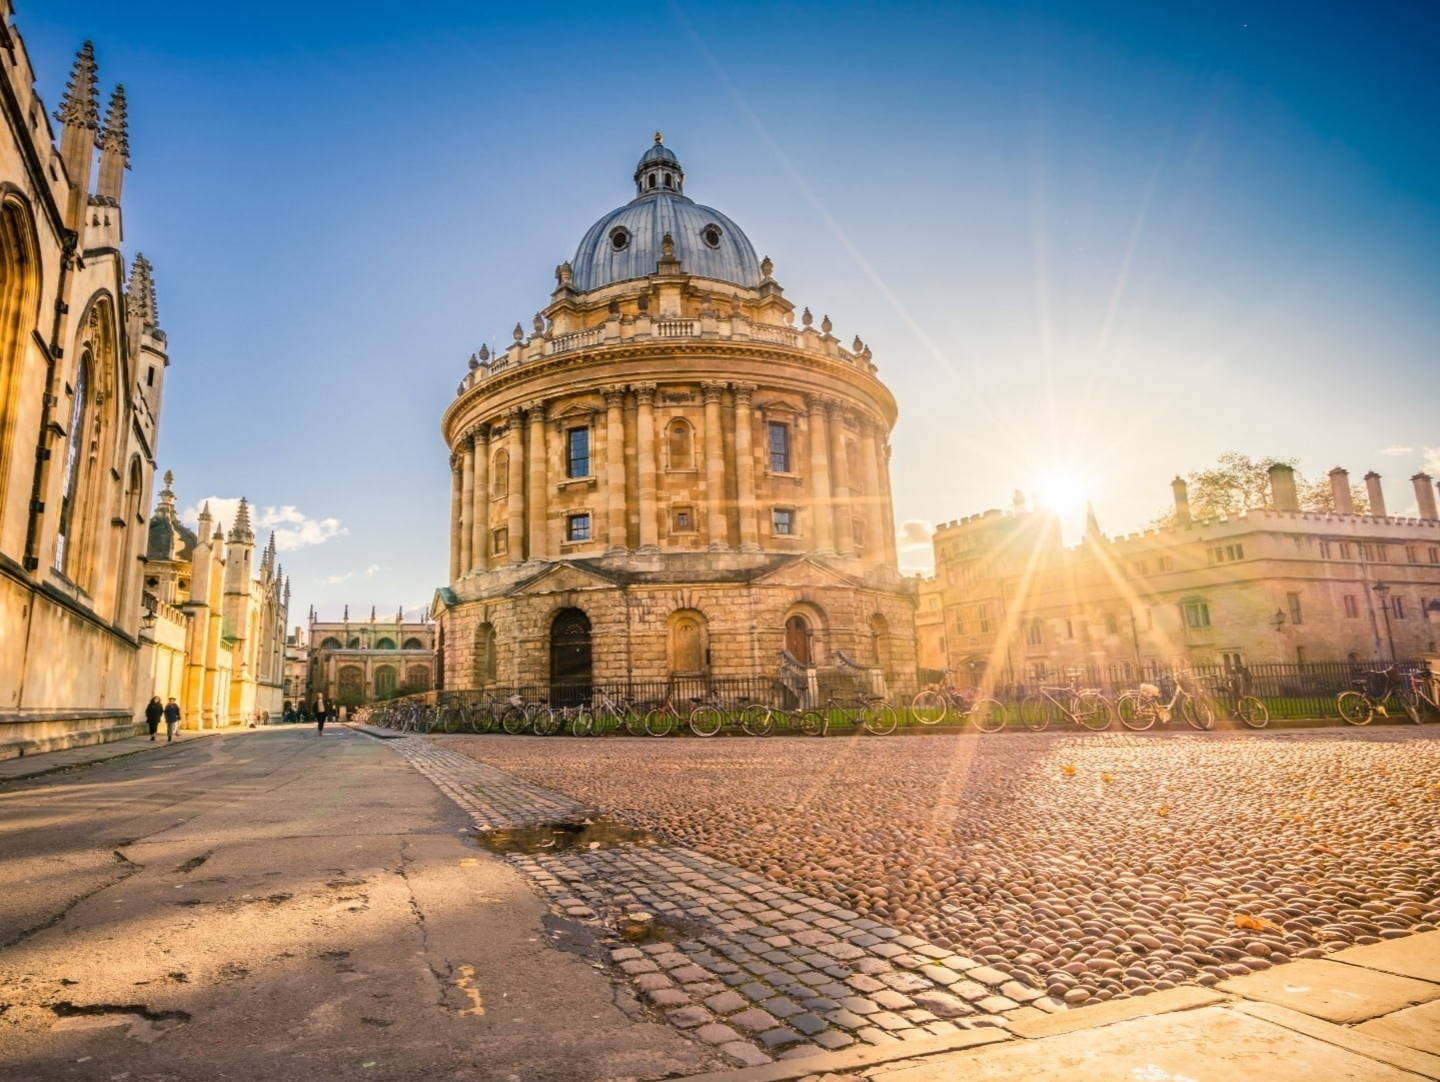 The Radcliffe Camera building at sunset